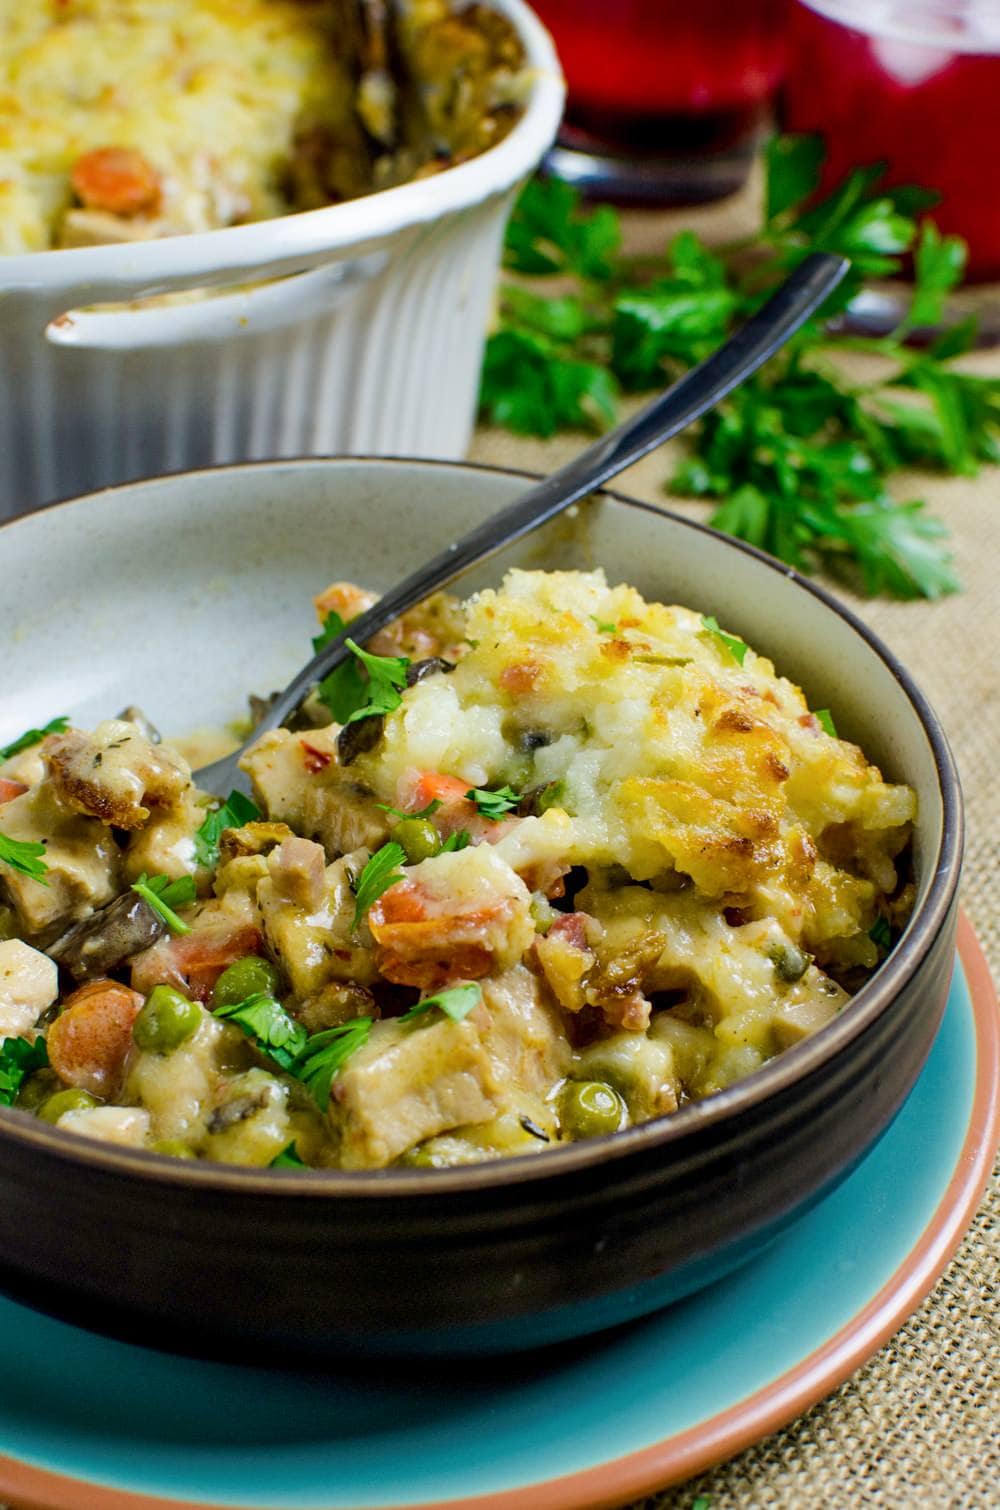 This Creamy Turkey Shepherd's Pot Pie topped with cheese, bacon and creamy mashed potato, and then baked until the potatoes turn a light golden brown, will have you counting down the days for the day after thanksgiving!